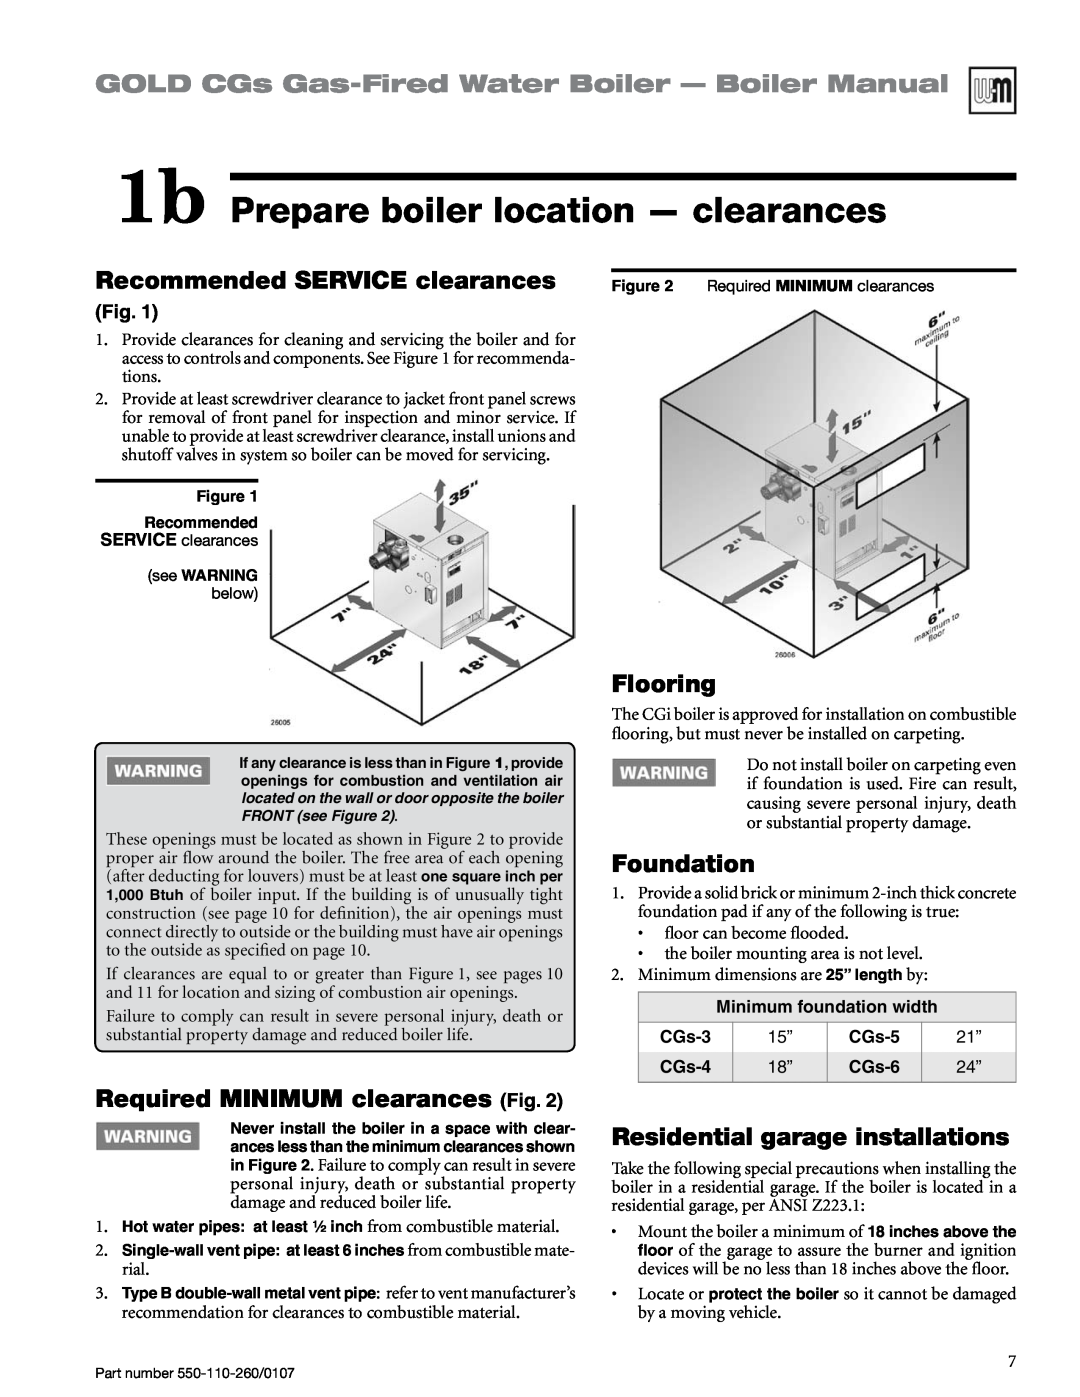 Weil-McLain 550-110-260/0107 1b Prepare boiler location — clearances, Recommended SERVICE clearances, Flooring, Foundation 